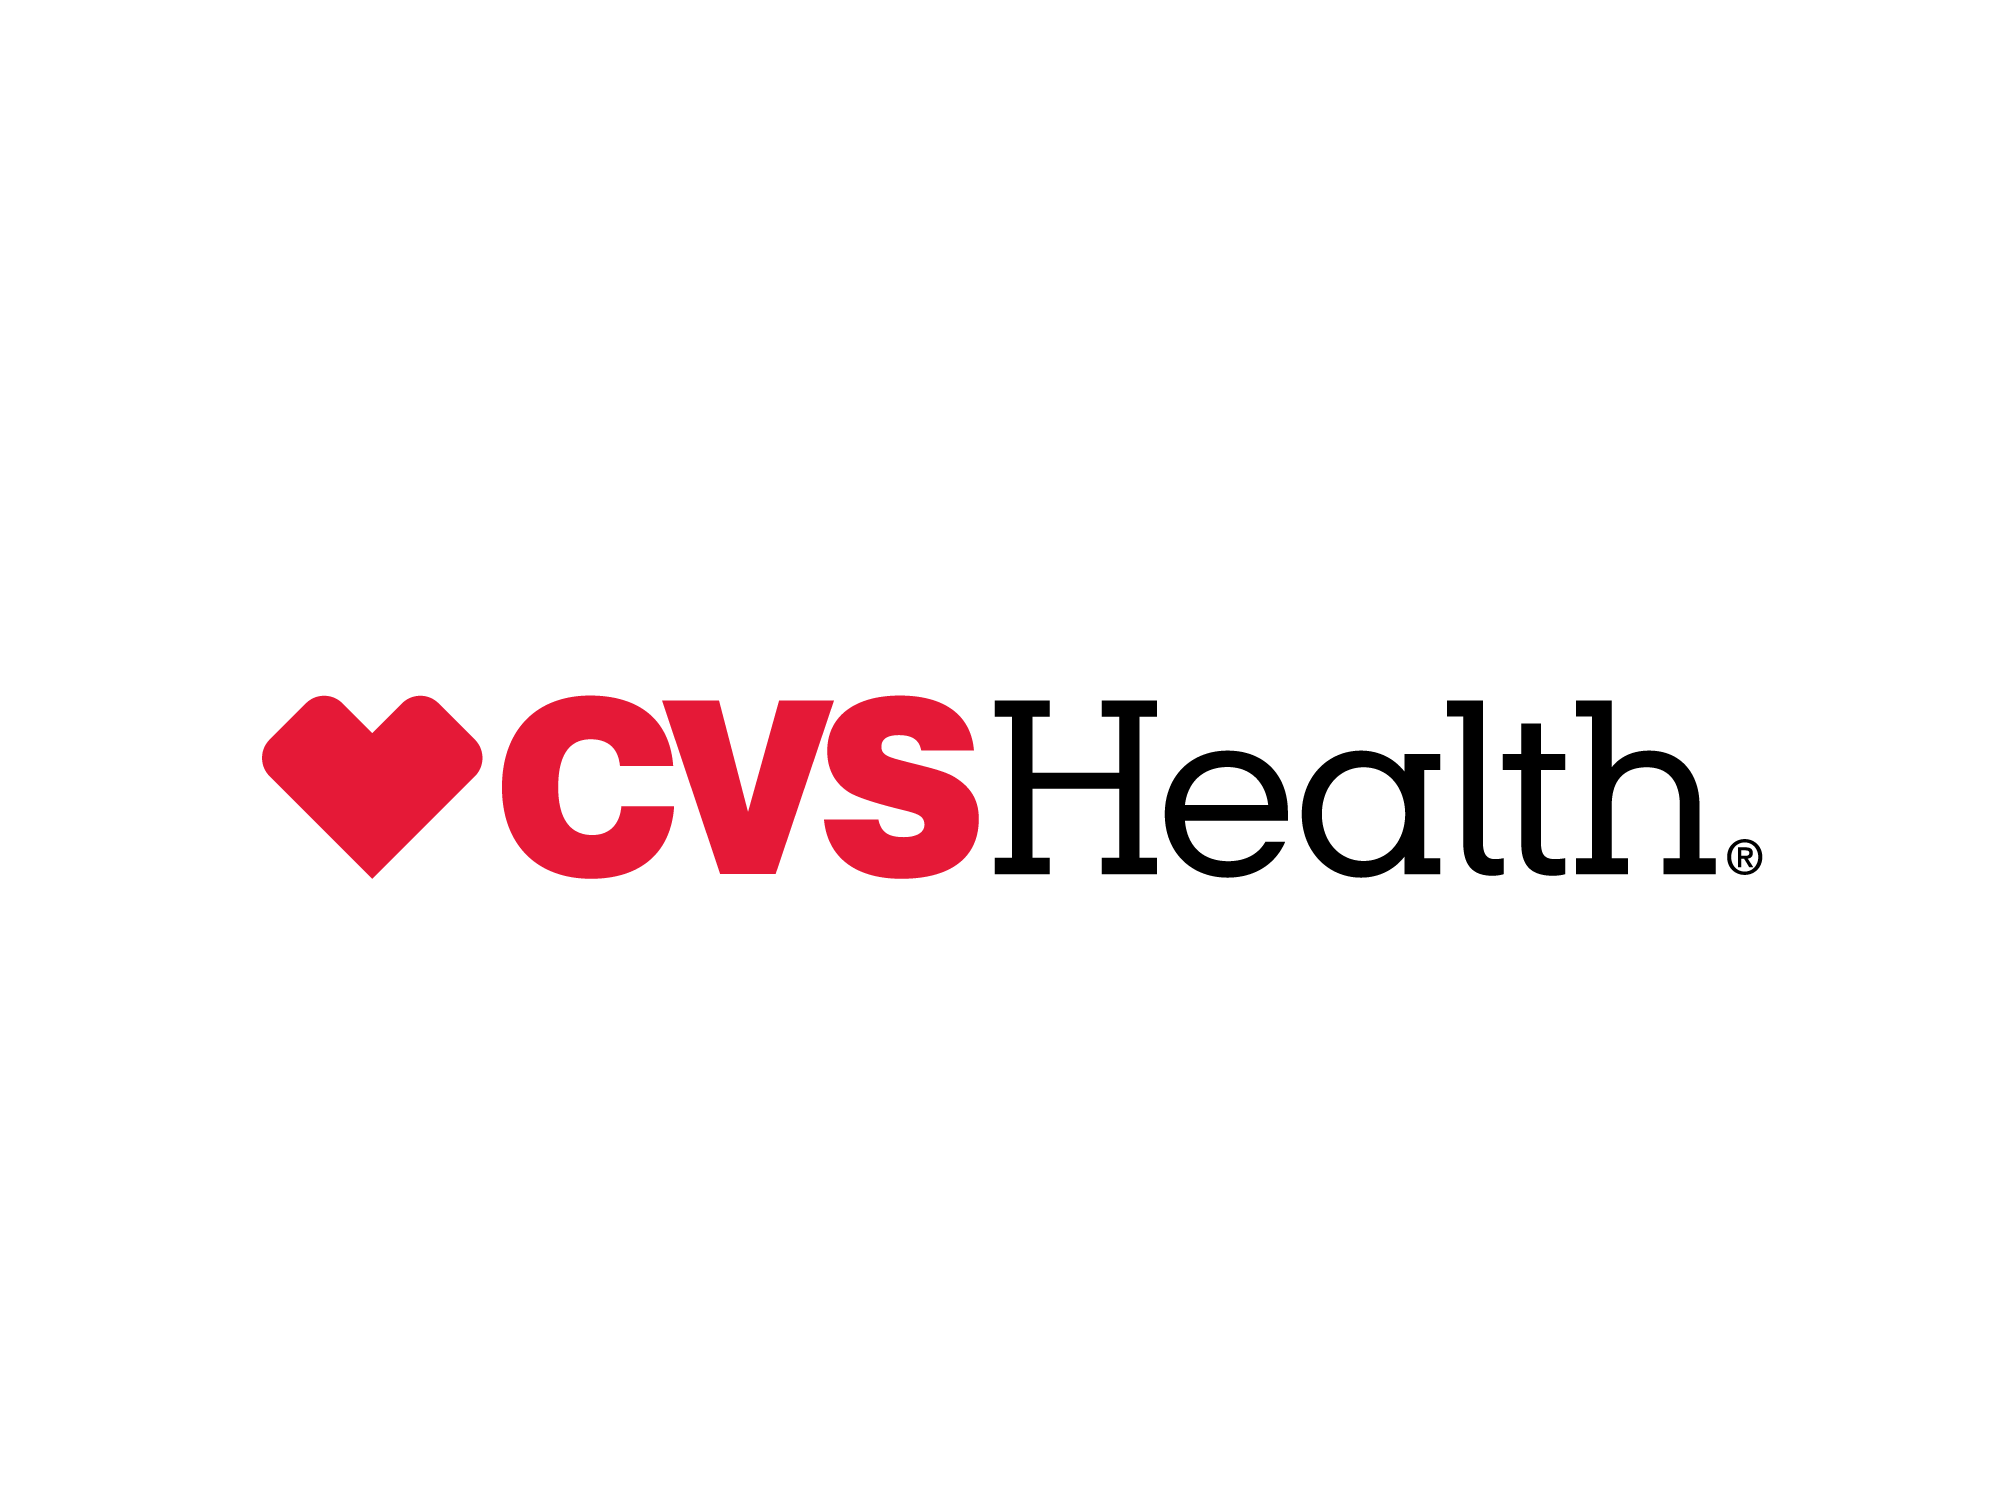 cvs health is pleased to continue your application